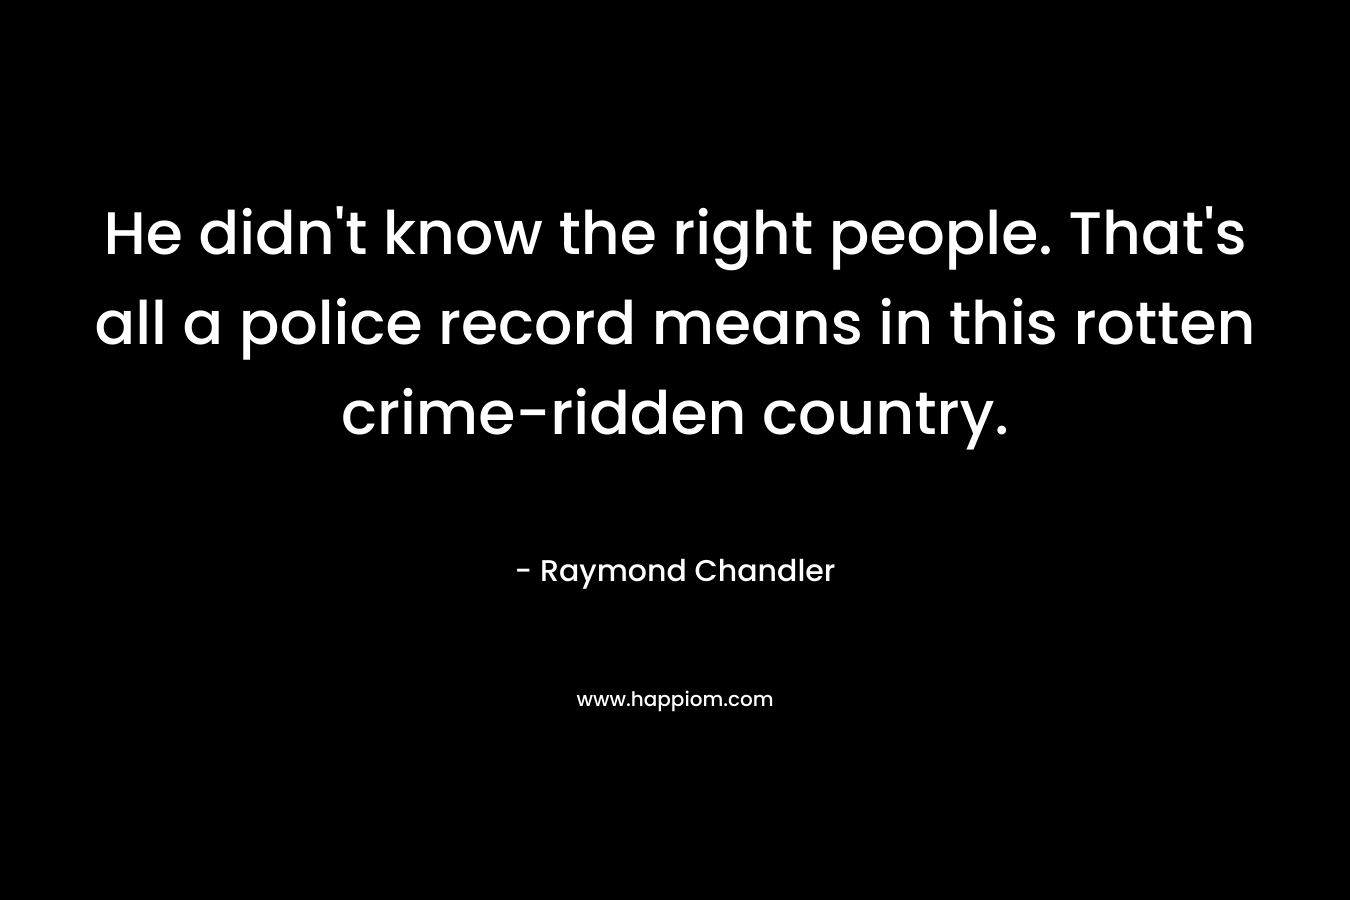 He didn't know the right people. That's all a police record means in this rotten crime-ridden country.